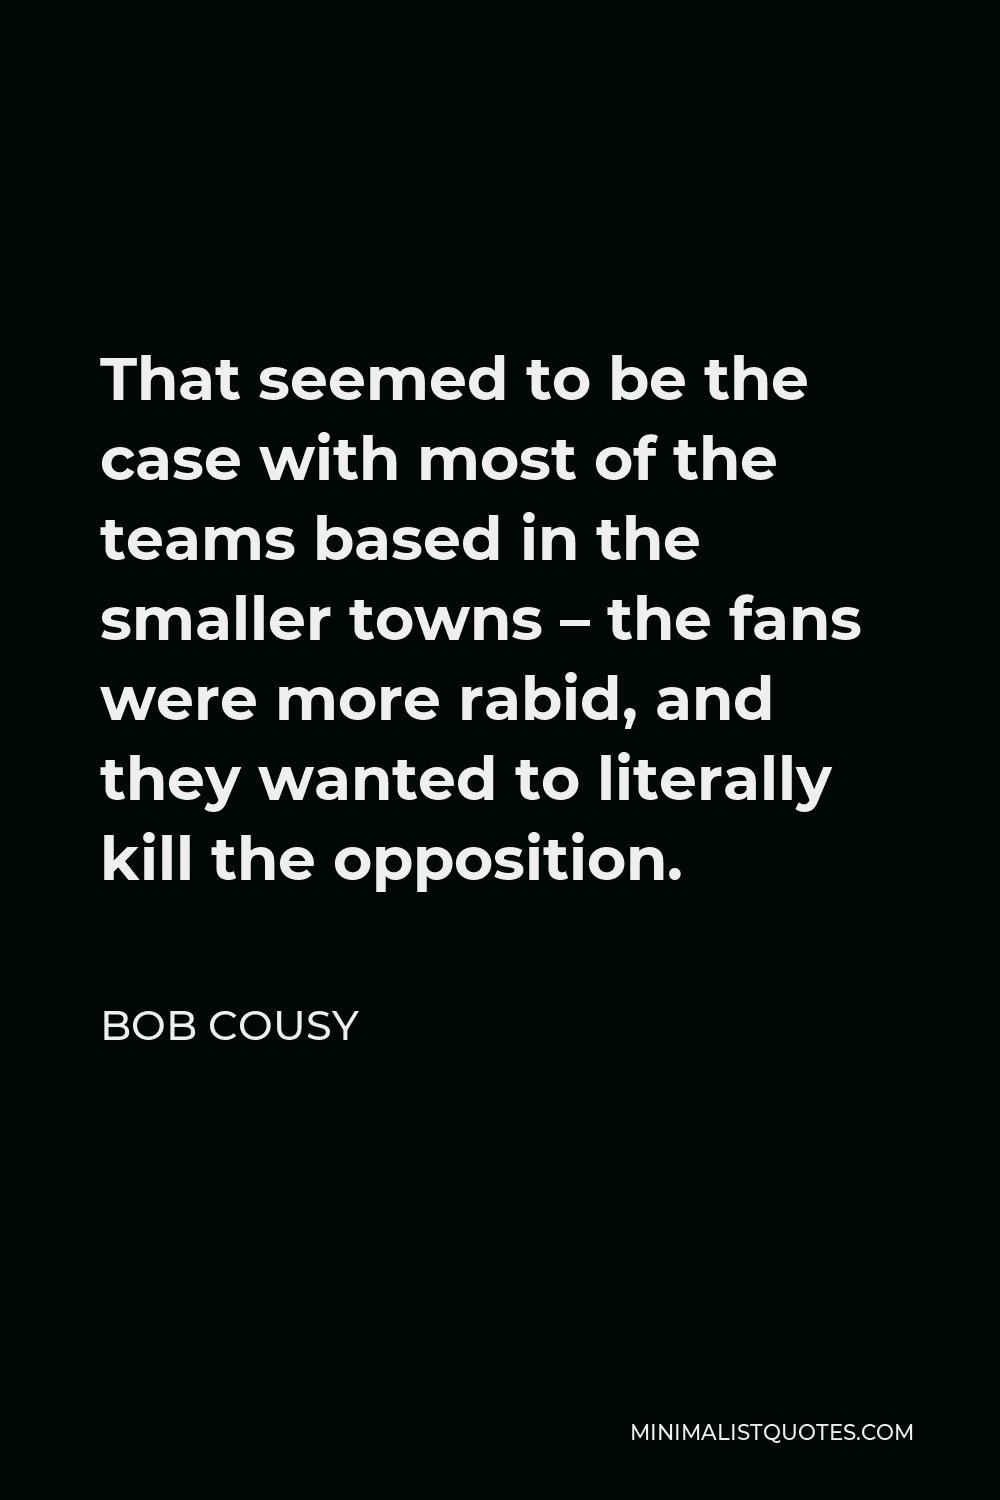 Bob Cousy Quote - That seemed to be the case with most of the teams based in the smaller towns – the fans were more rabid, and they wanted to literally kill the opposition.